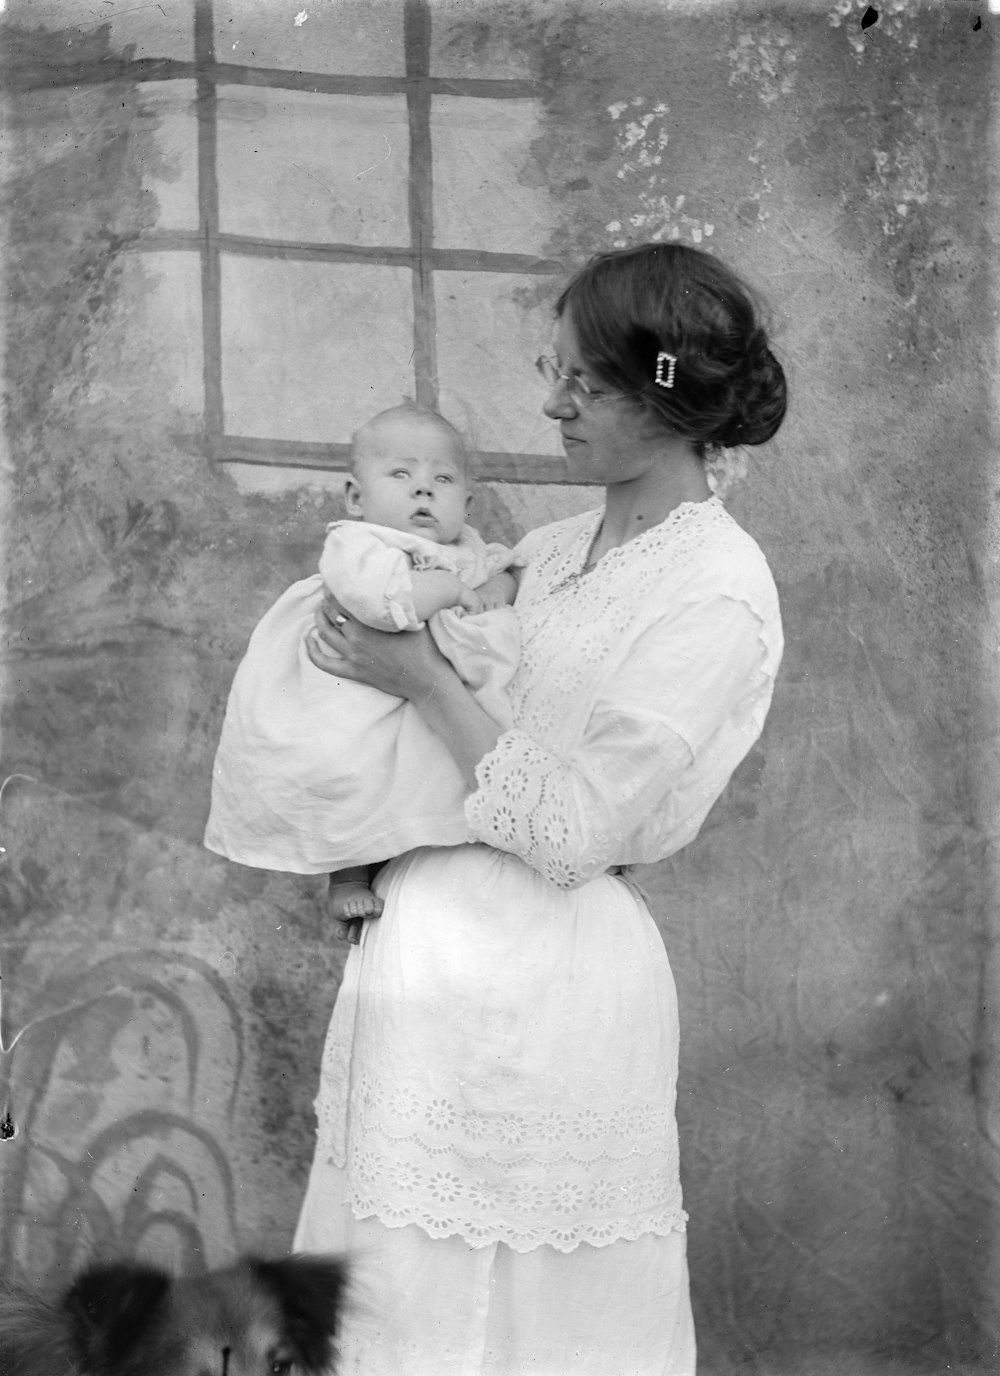 grayscale photo of woman in white dress carrying baby